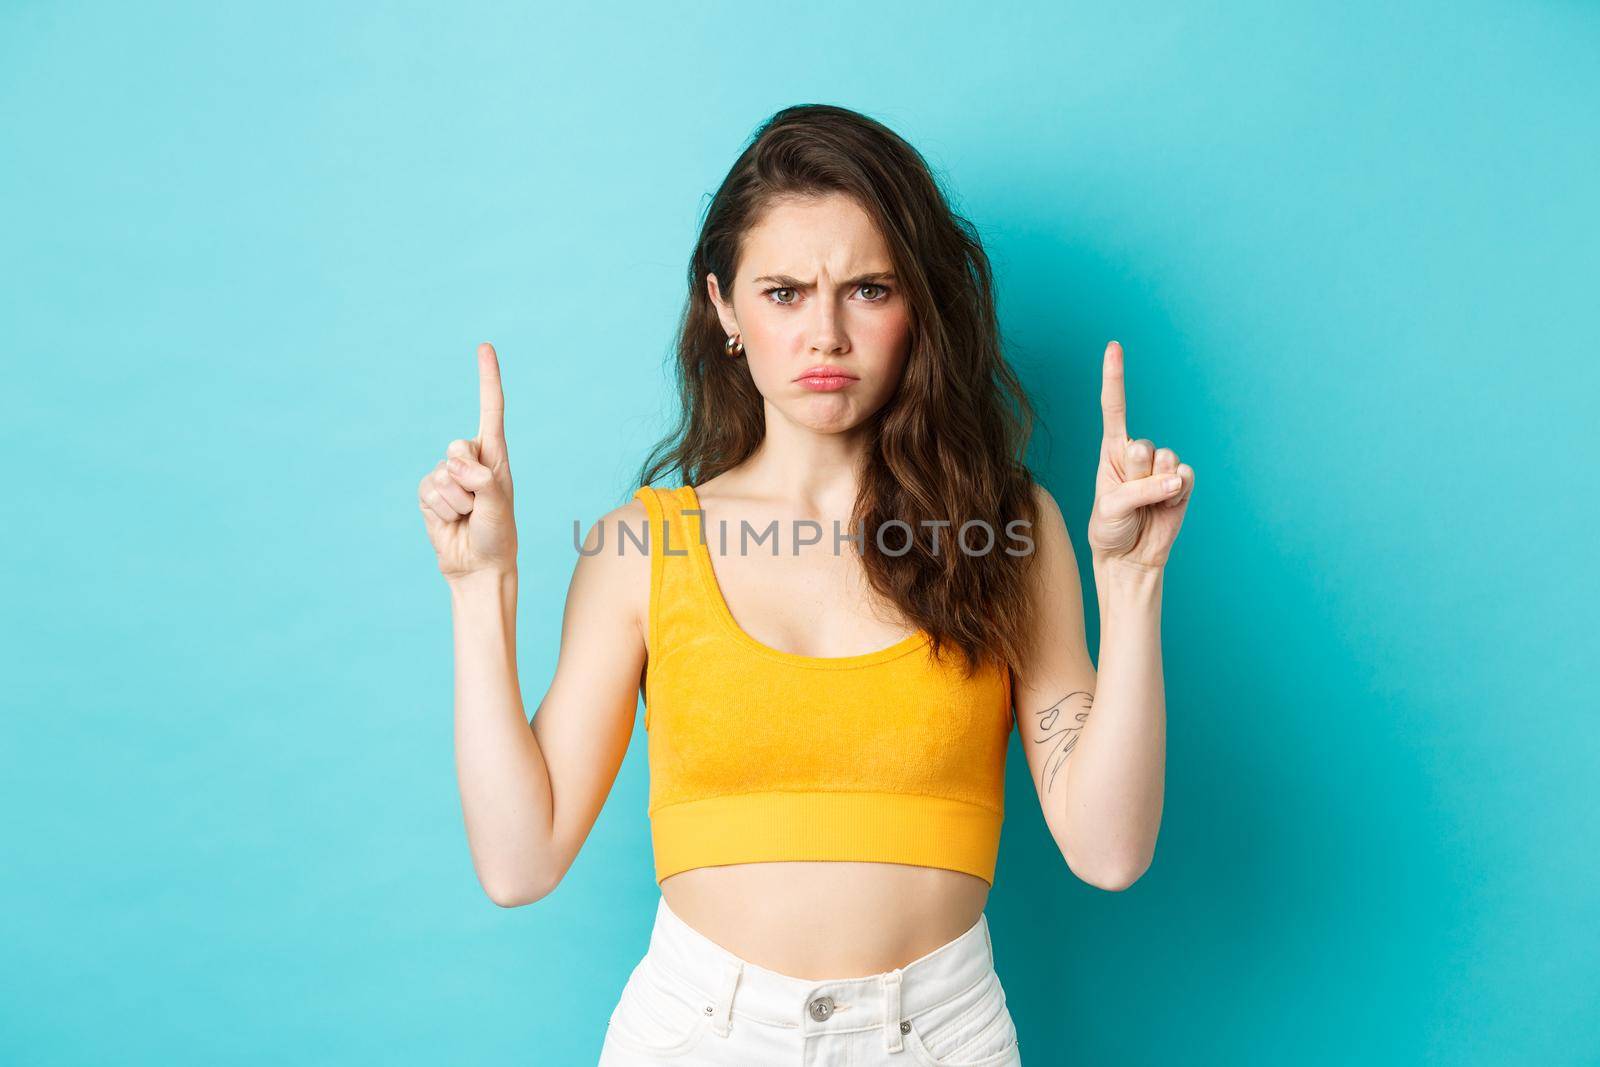 Summer lifestyle concept. Disappointed moody girl complaining about unfair situation, frowning and sulking upset, pointing fingers up at logo, standing over blue background.